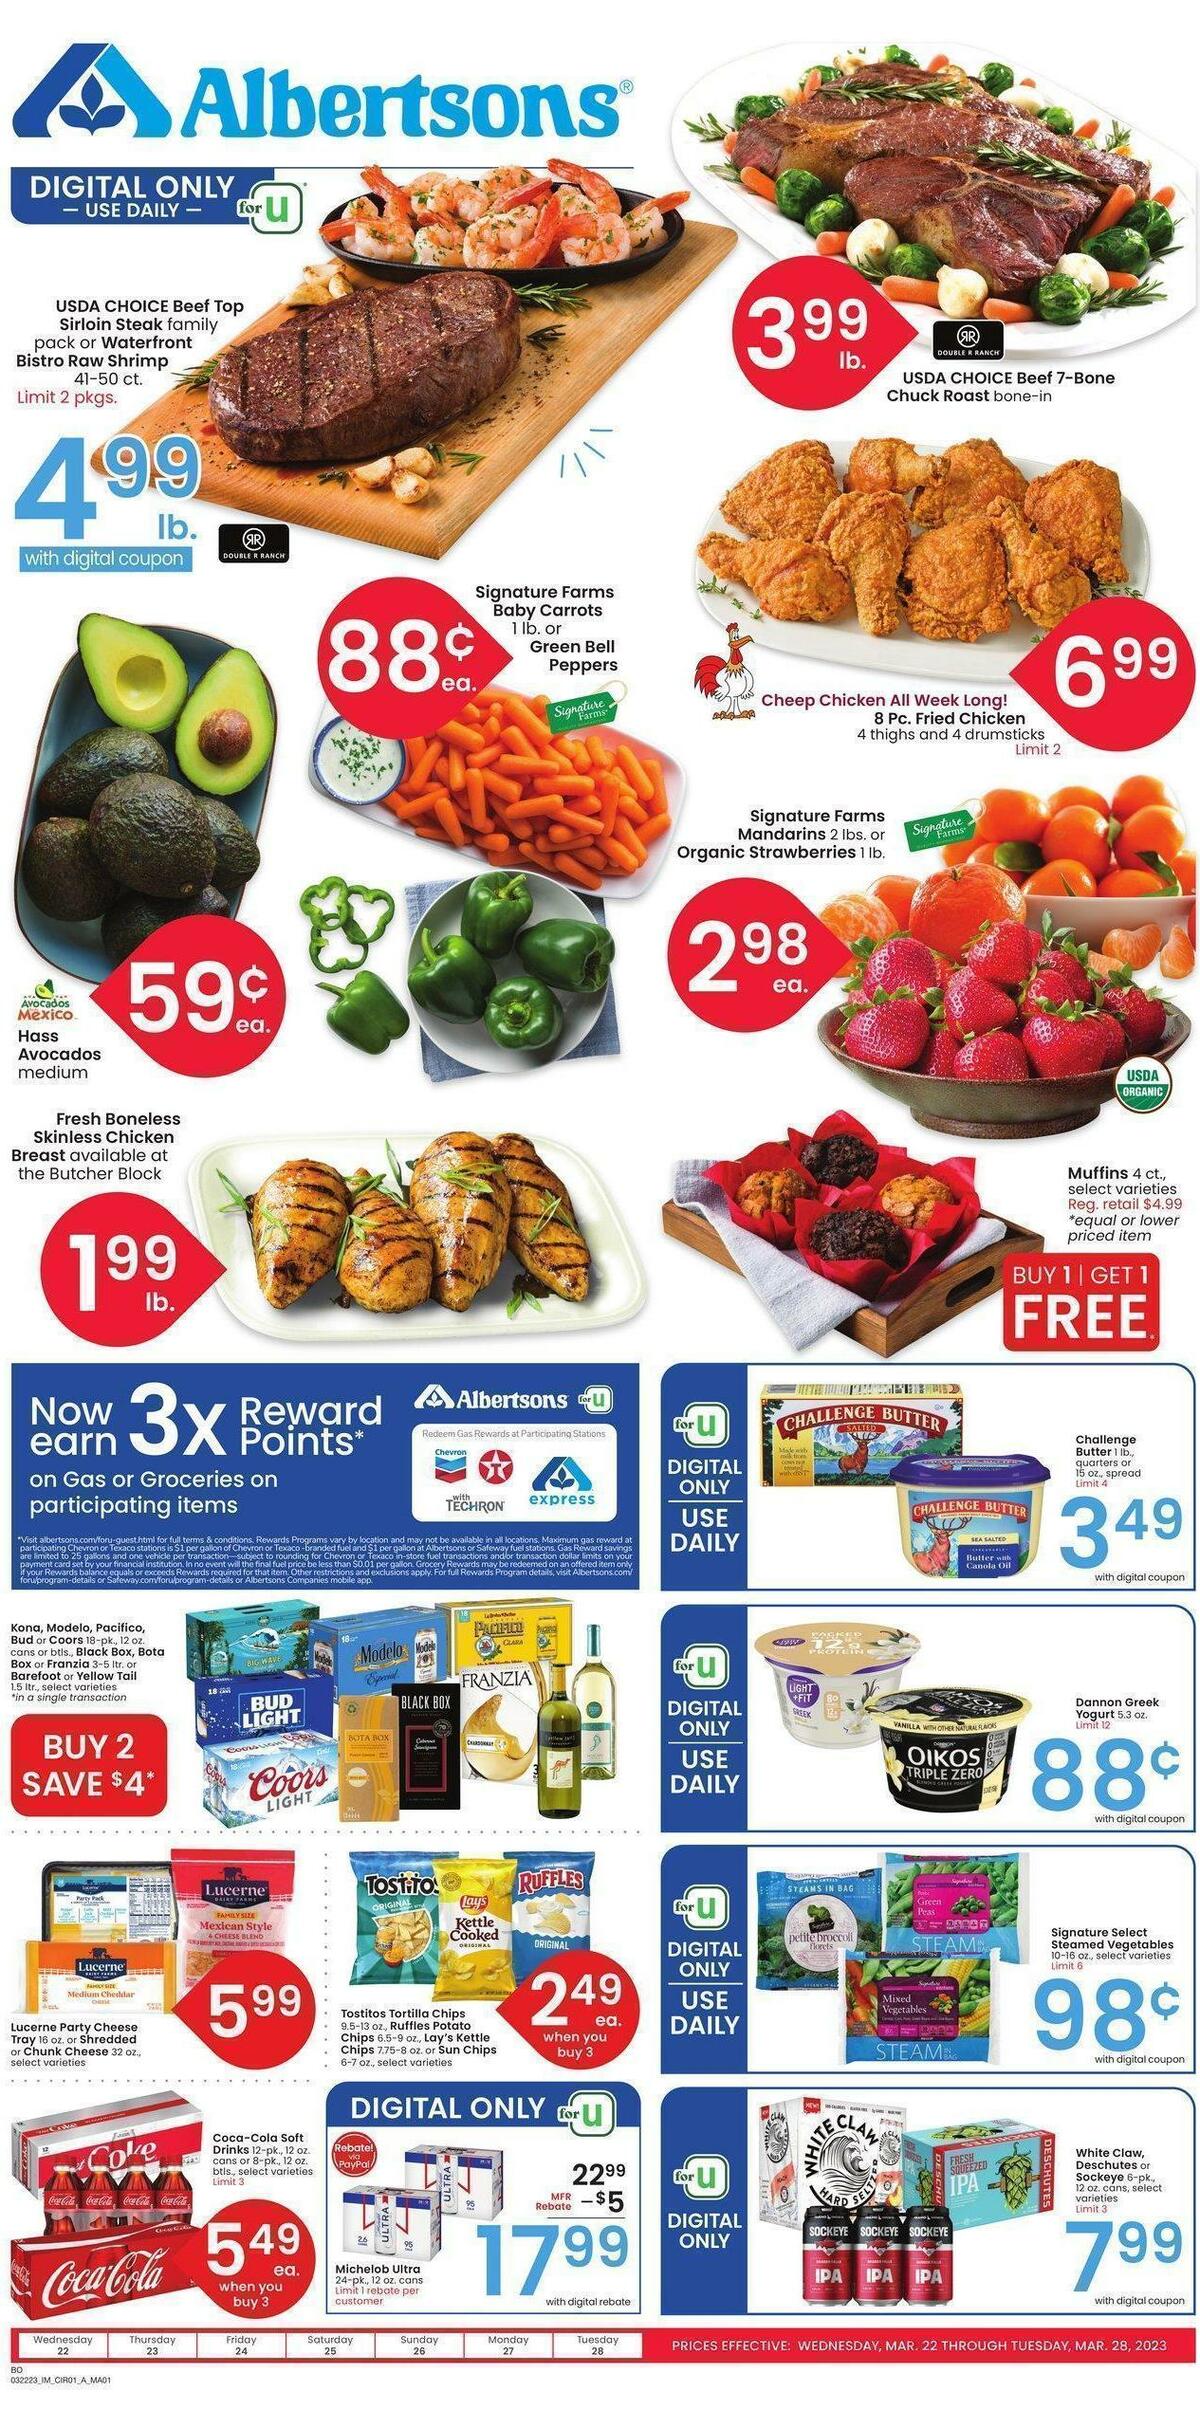 Albertsons Weekly Ads & Special Buys from March 22